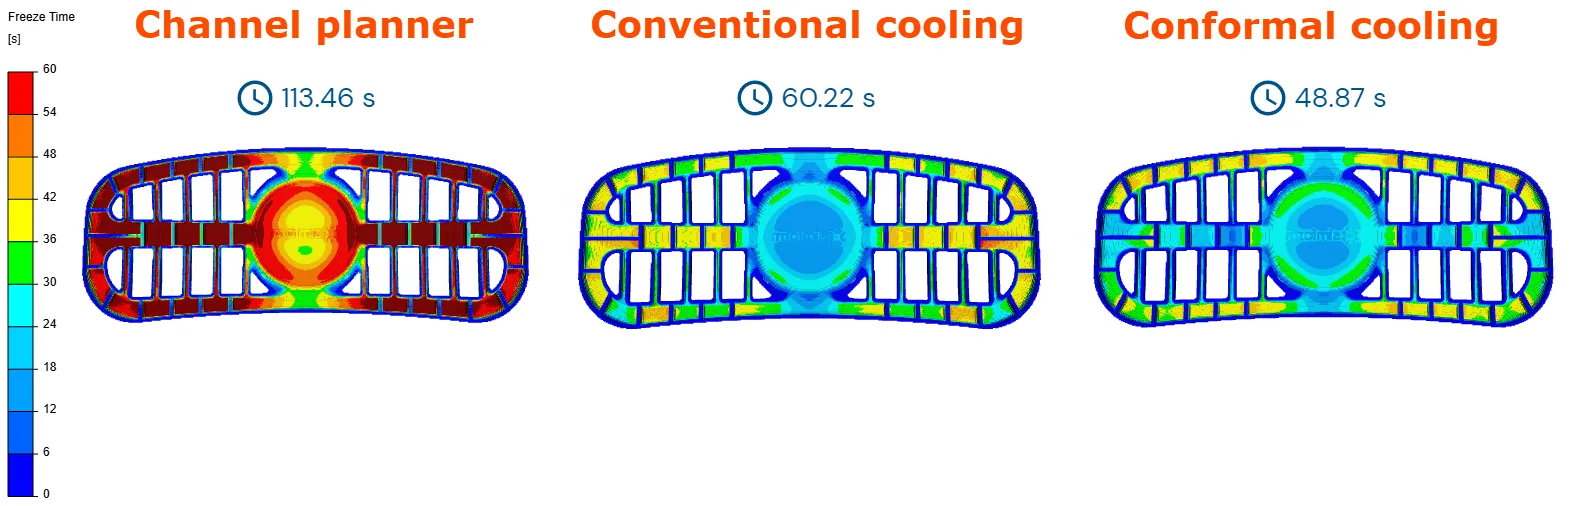 Comparing cooling times with different cooling systems